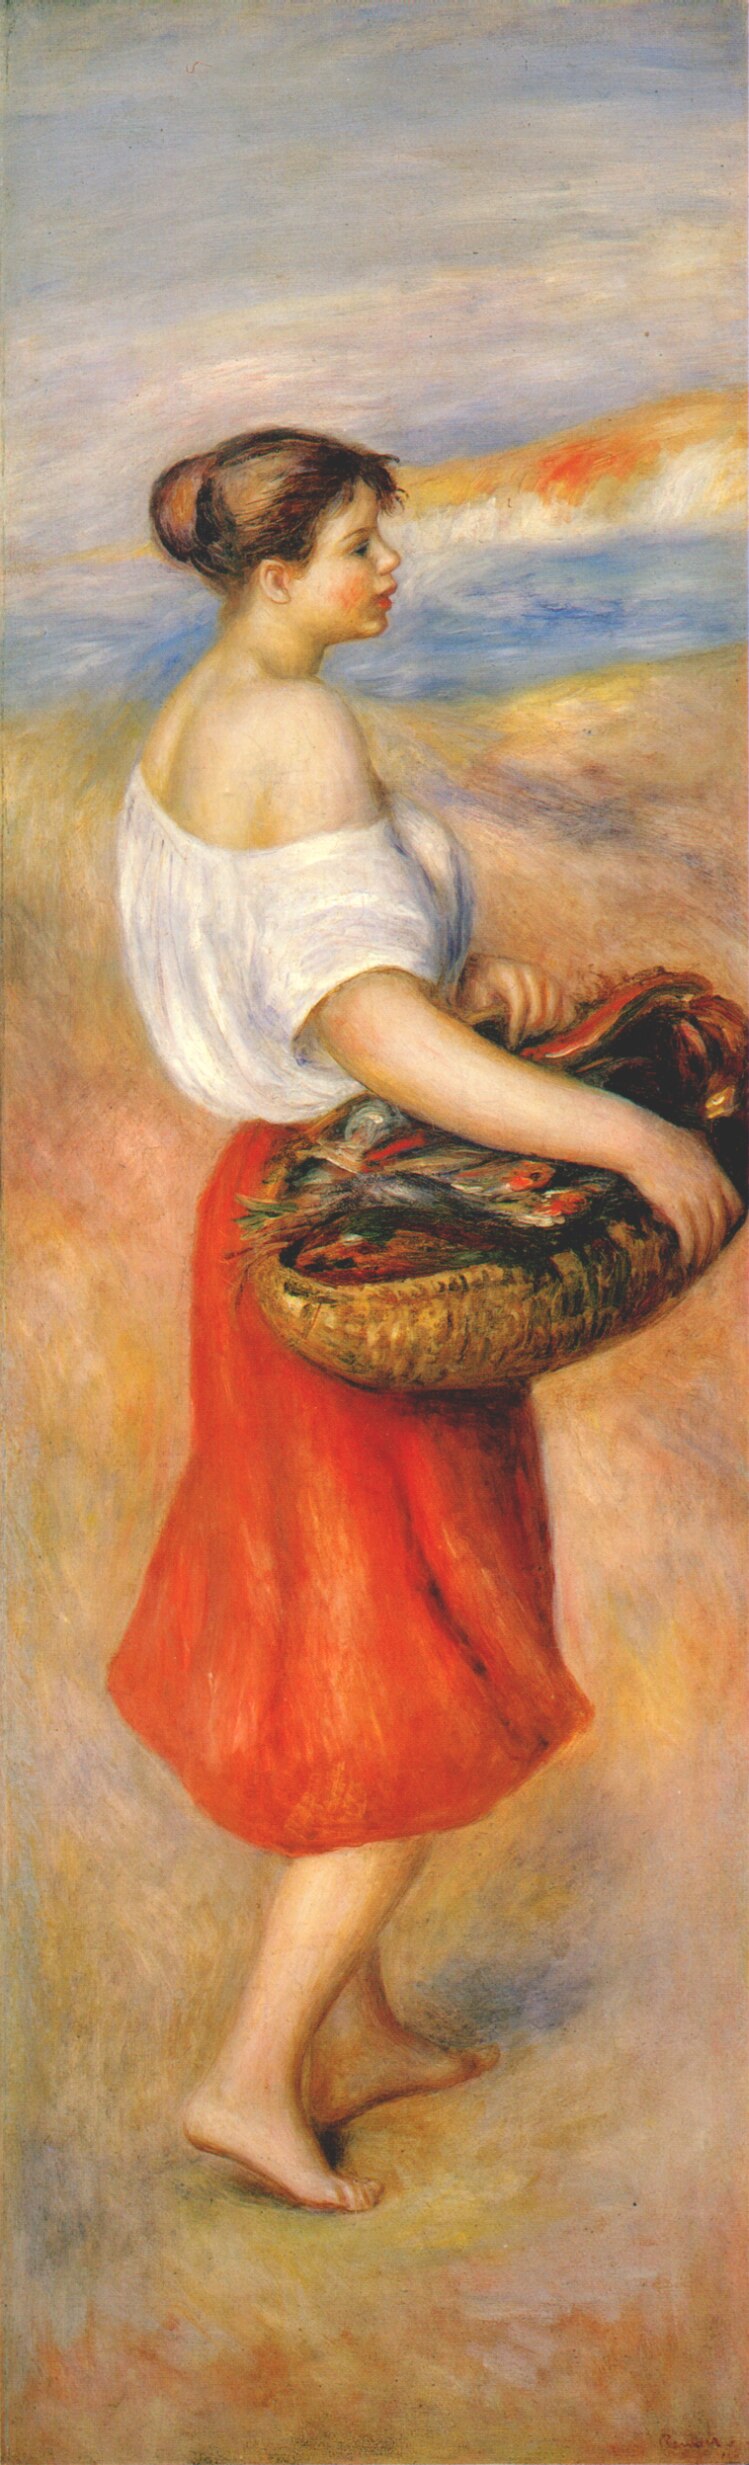 Girl with a basket of fish 1889